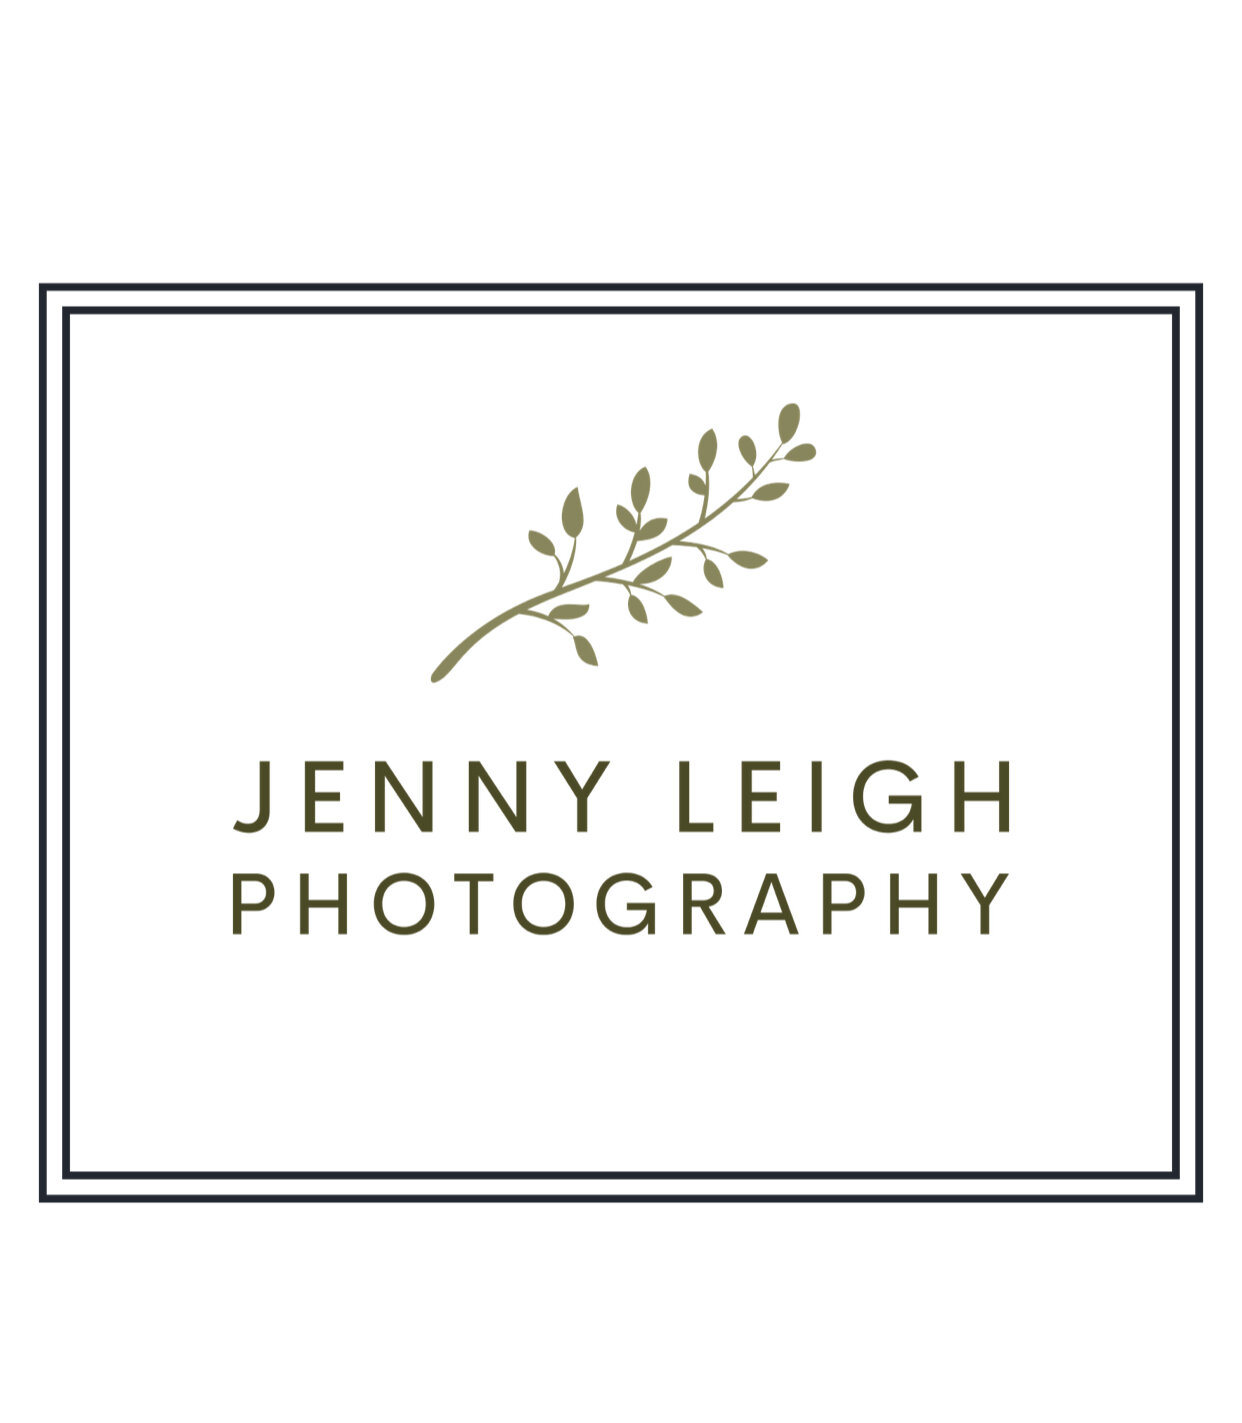 Jenny Leigh Photography